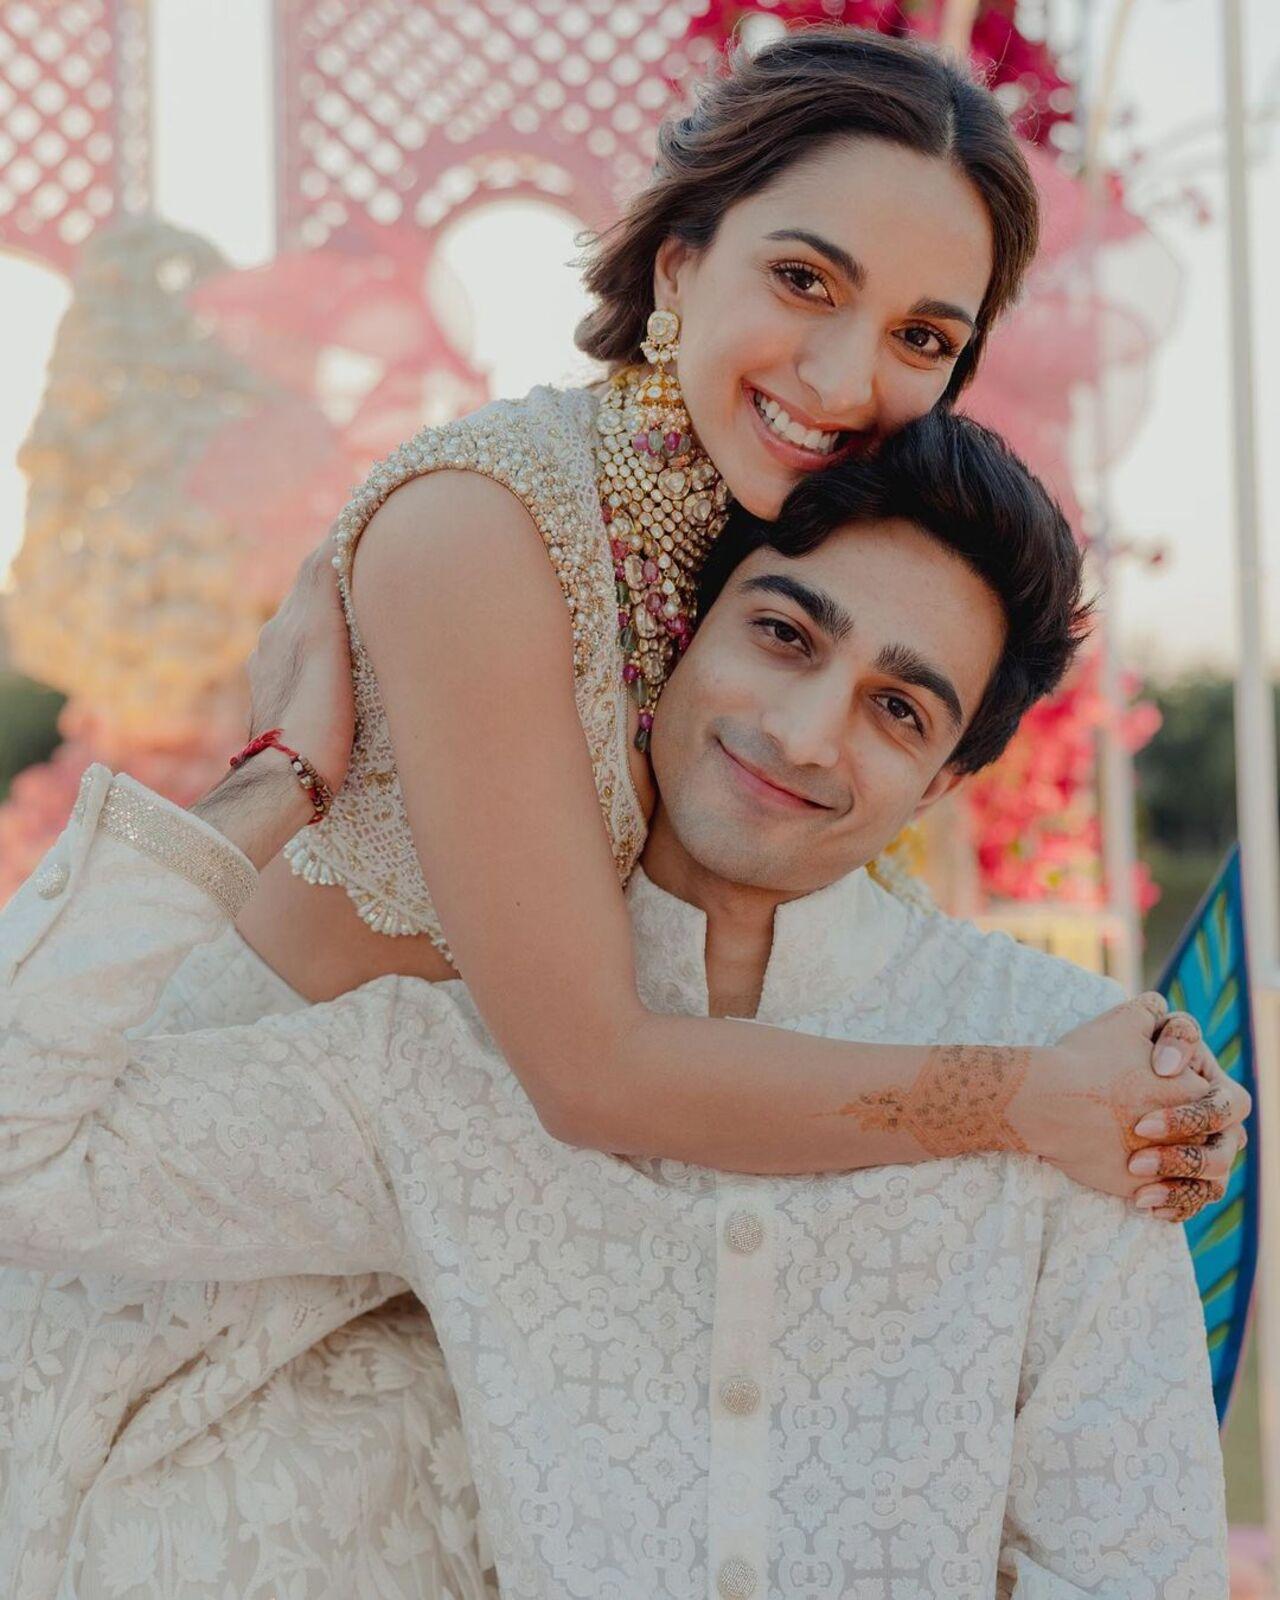 Kiara Advani and her brother Mishaal Advani set major sibling goals at the former's wedding in February this year